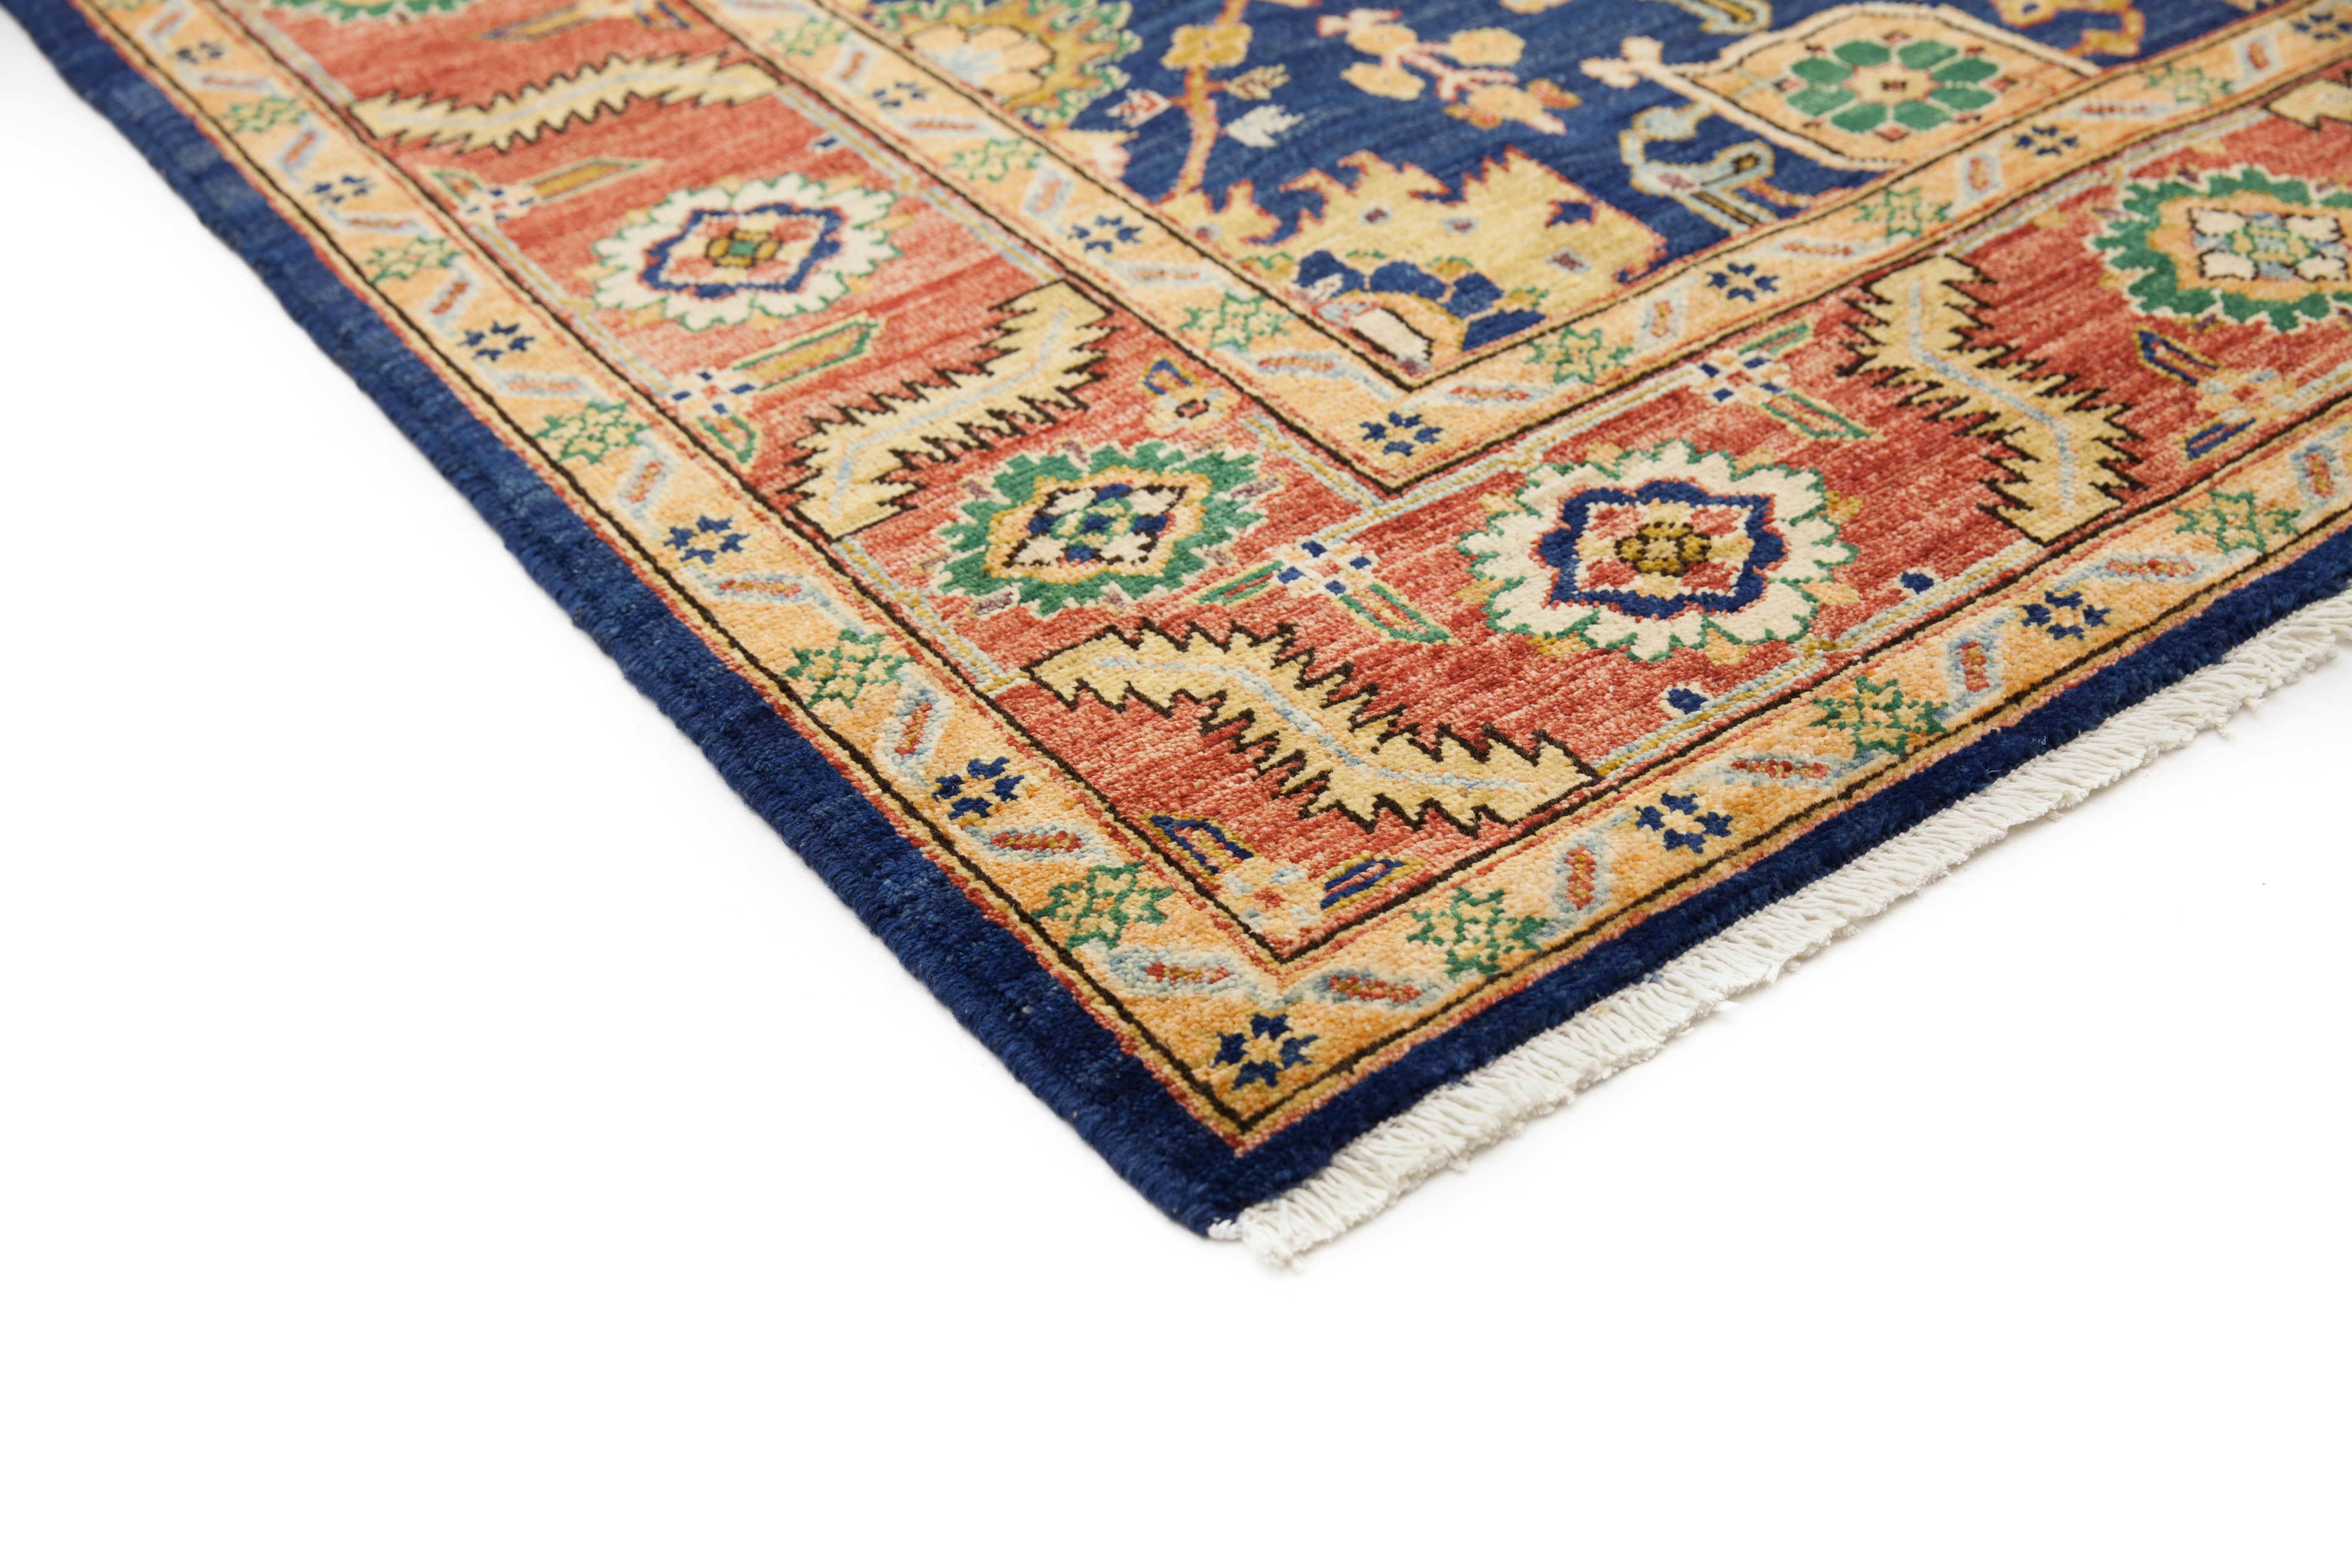 The wide-ranging Ziegler collection includes area rugs and large carpets in traditional Persian style but not as elaborated or complex. The designs are bold, striking and colorful. Heriz rugs, South Persian tribal pieces, true Ziegler Sultanabad’s,